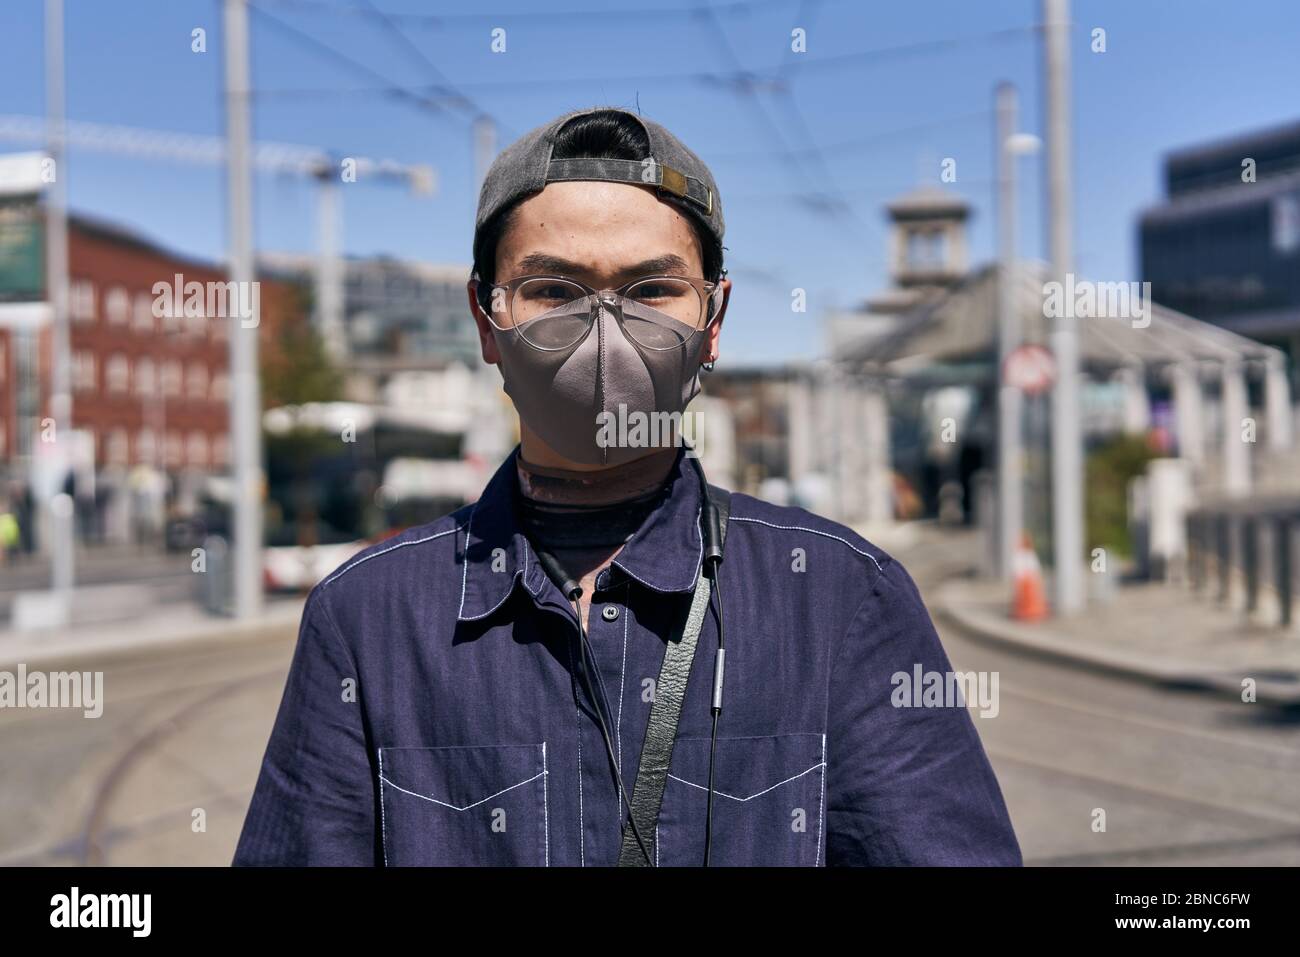 A man wearing a facemask during the global coronavirus pandemic in Dublin city, Ireland. Stock Photo